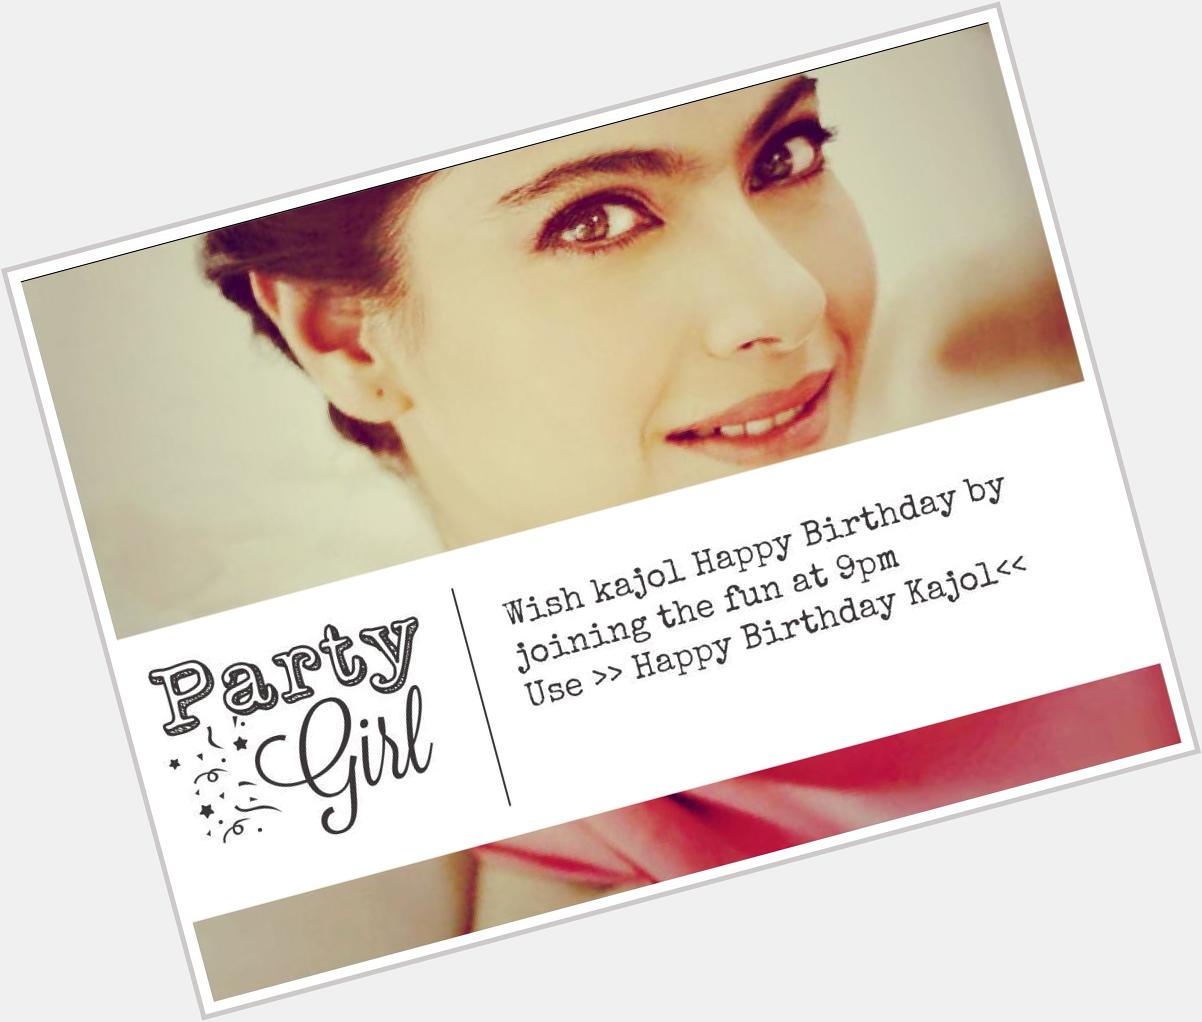 Hope Everyone Knows Tomorrow is \s Bday...
So Please Join the Trend since 9pm IST.

*HAPPY BIRTHDAY KAJOL* 